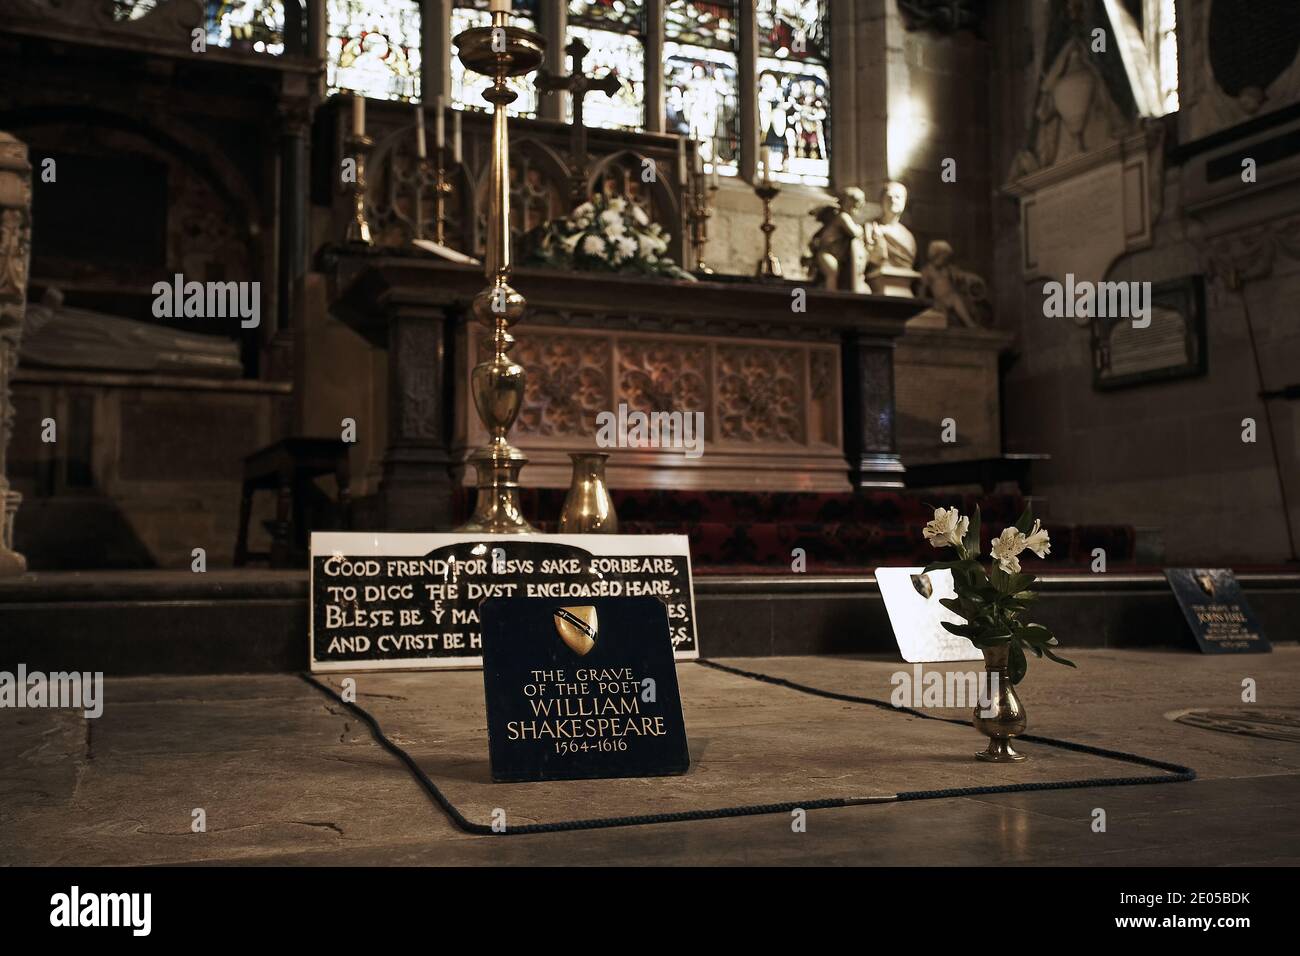 Great Britain/Stratford-upon-Avon / William Shakespeare Grave at the Holy Trinity Church in Stratford-upon-Avon. Stock Photo